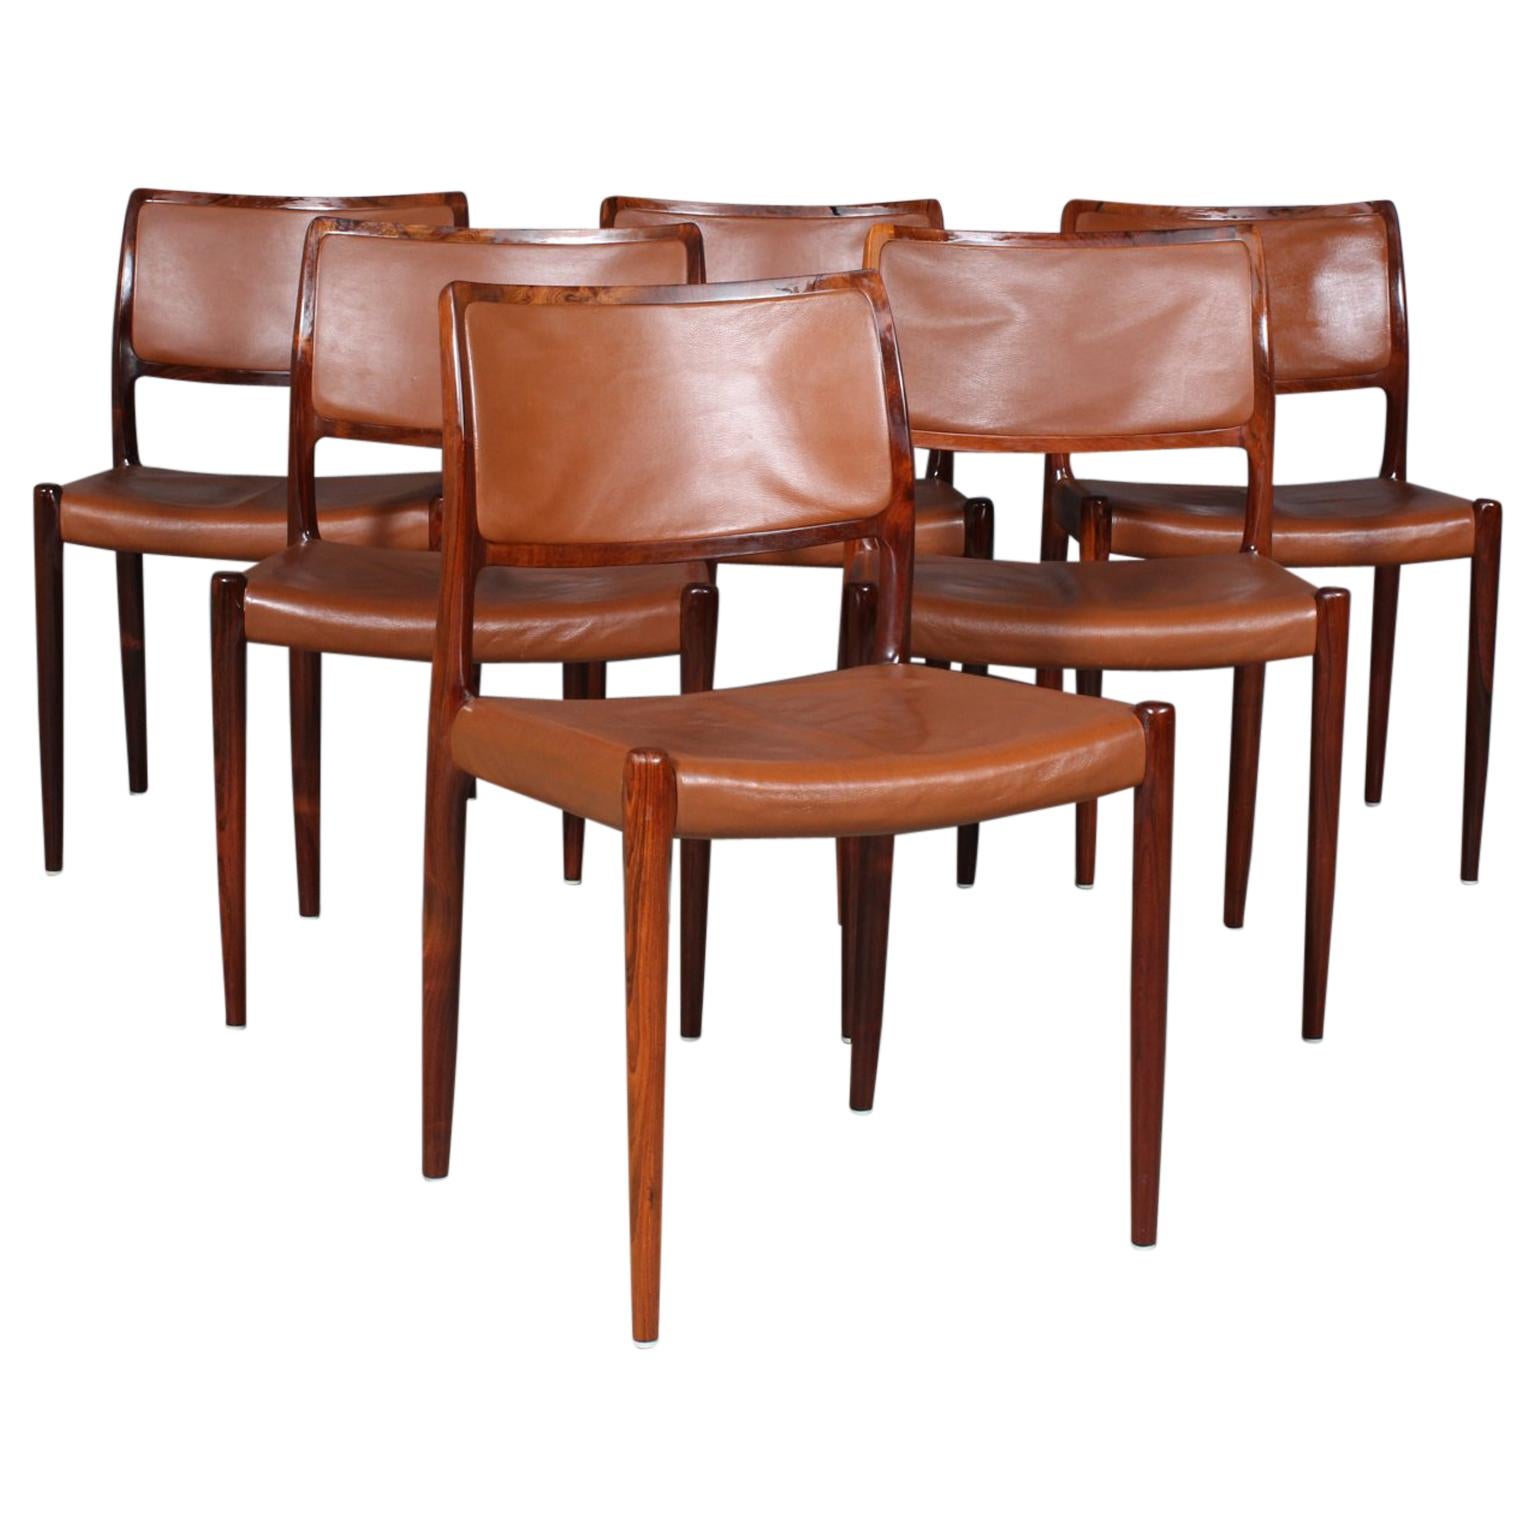 Set of six N. O. Møller dining chairs